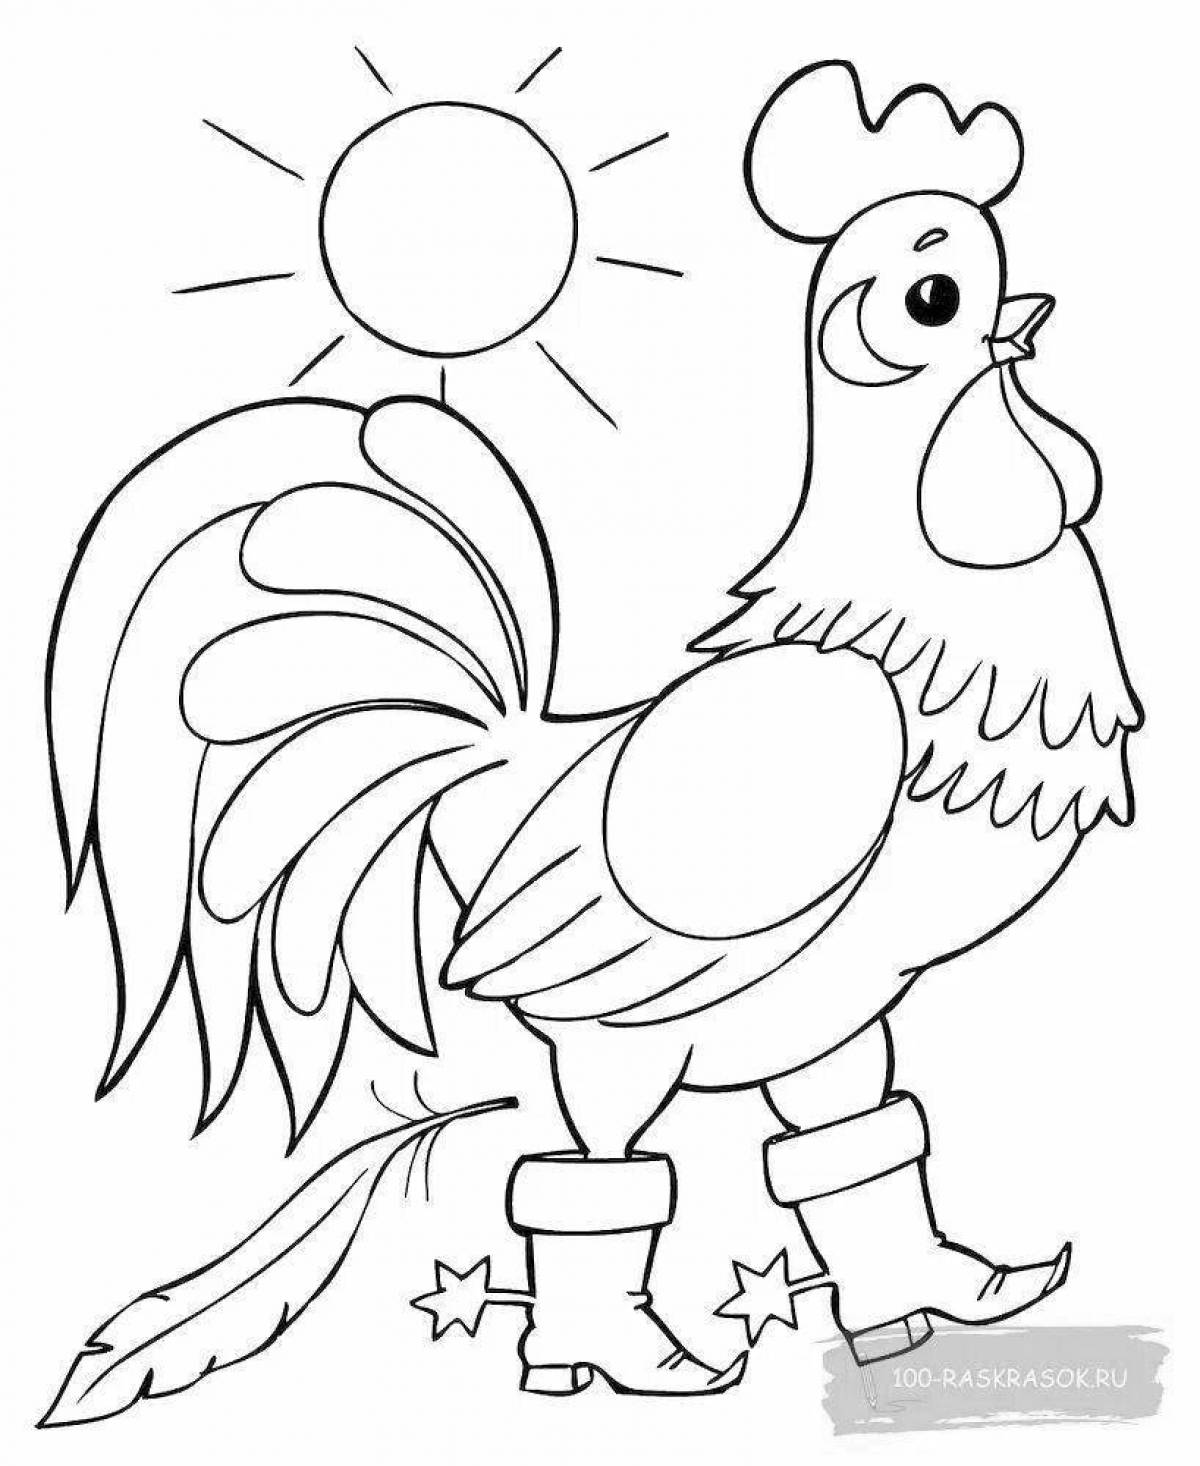 Greatly painted rooster coloring book